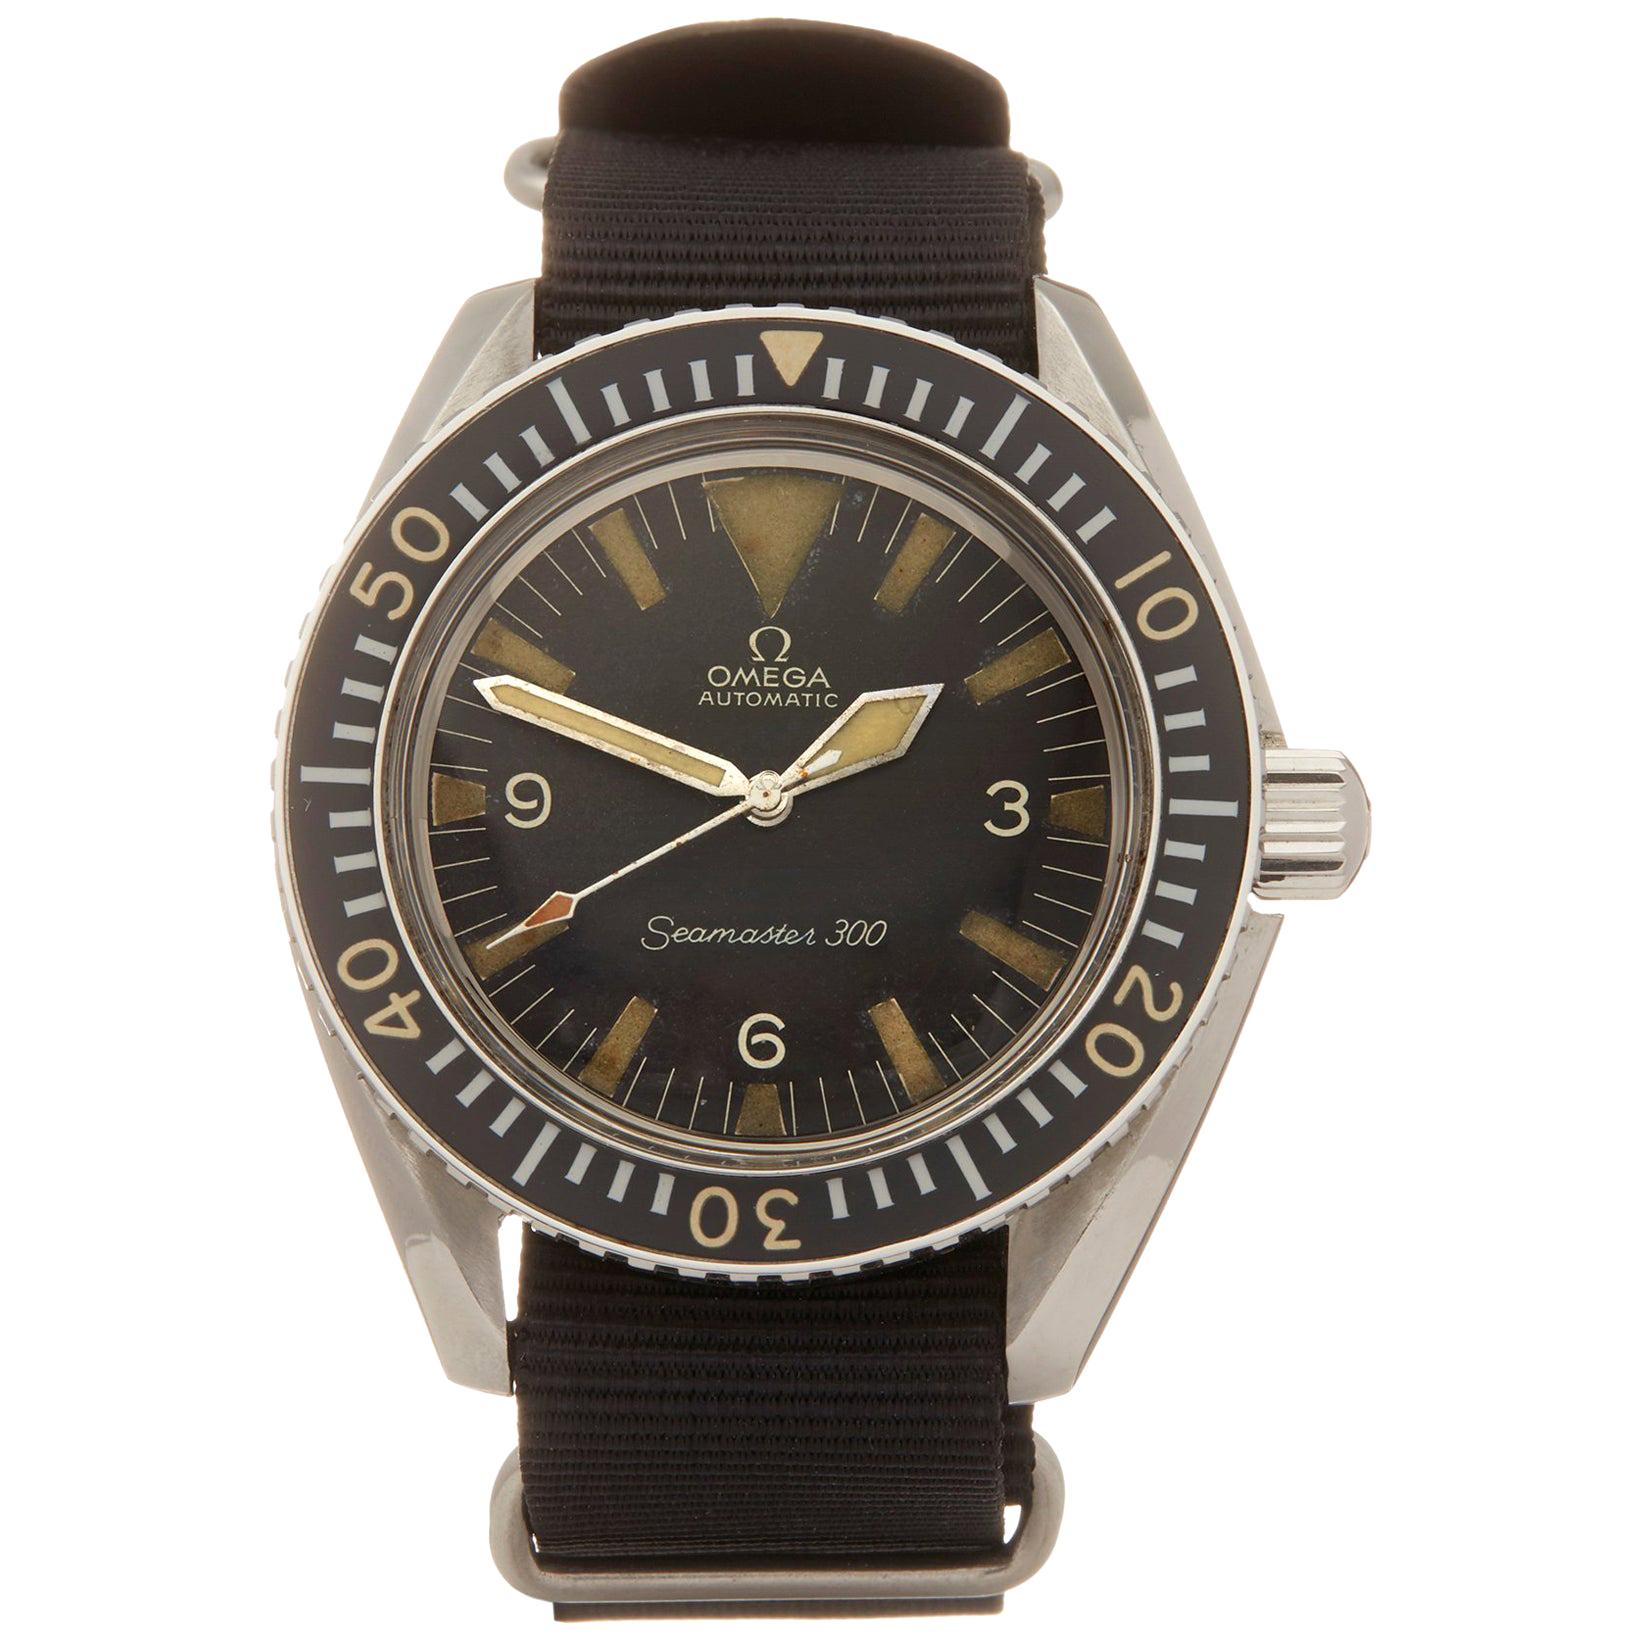 Omega Military Watch - For Sale on 1stDibs | vintage omega military watch, omega  military watch vintage, omega field watch